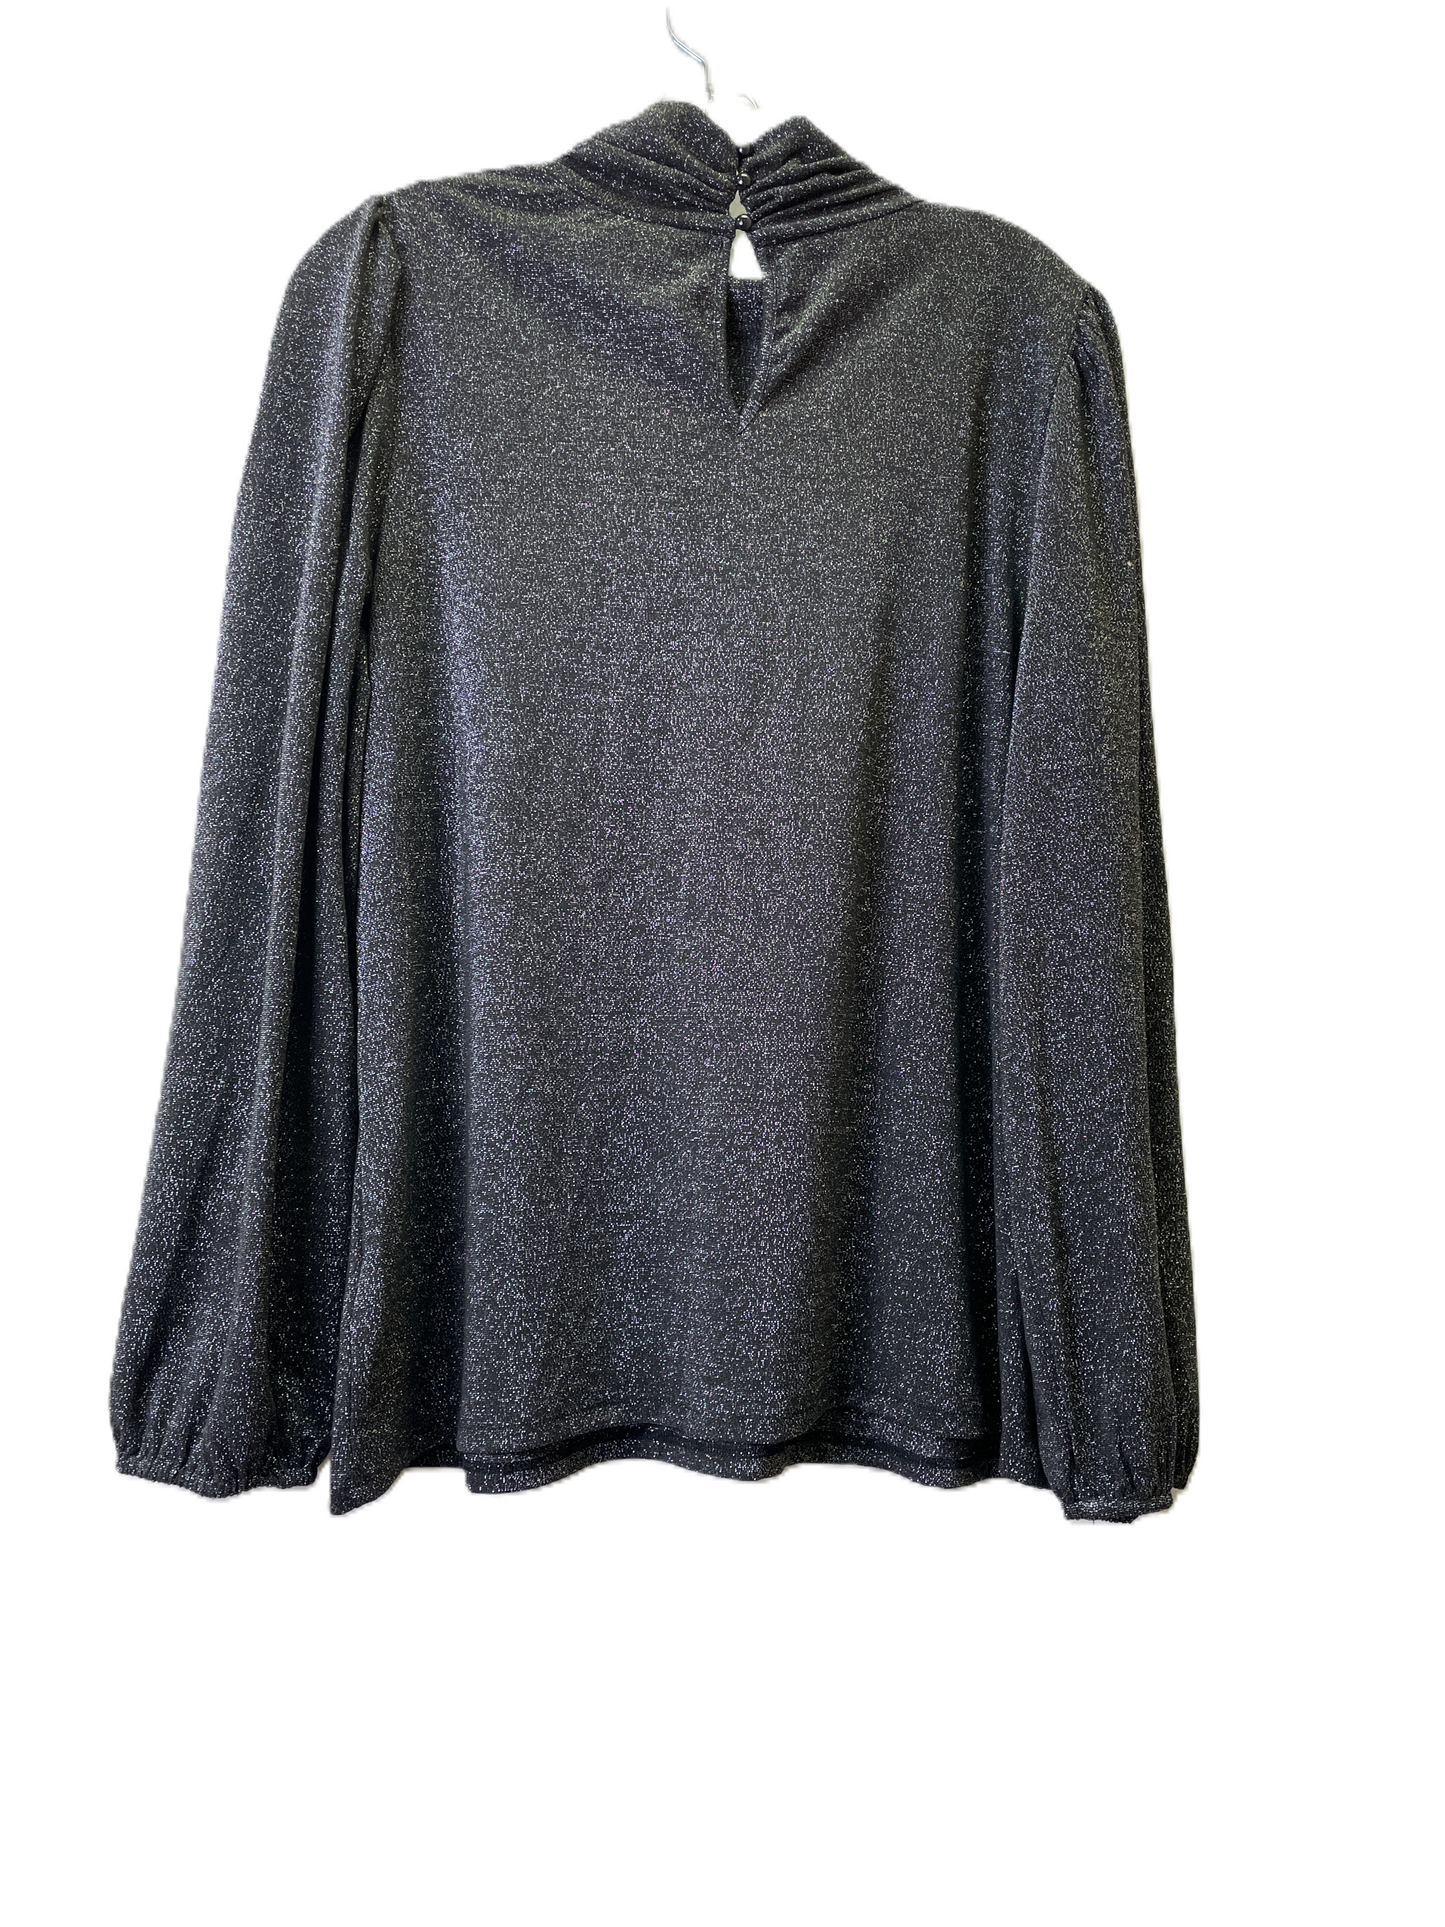 Black Top Long Sleeve By Who What Wear, Size: L